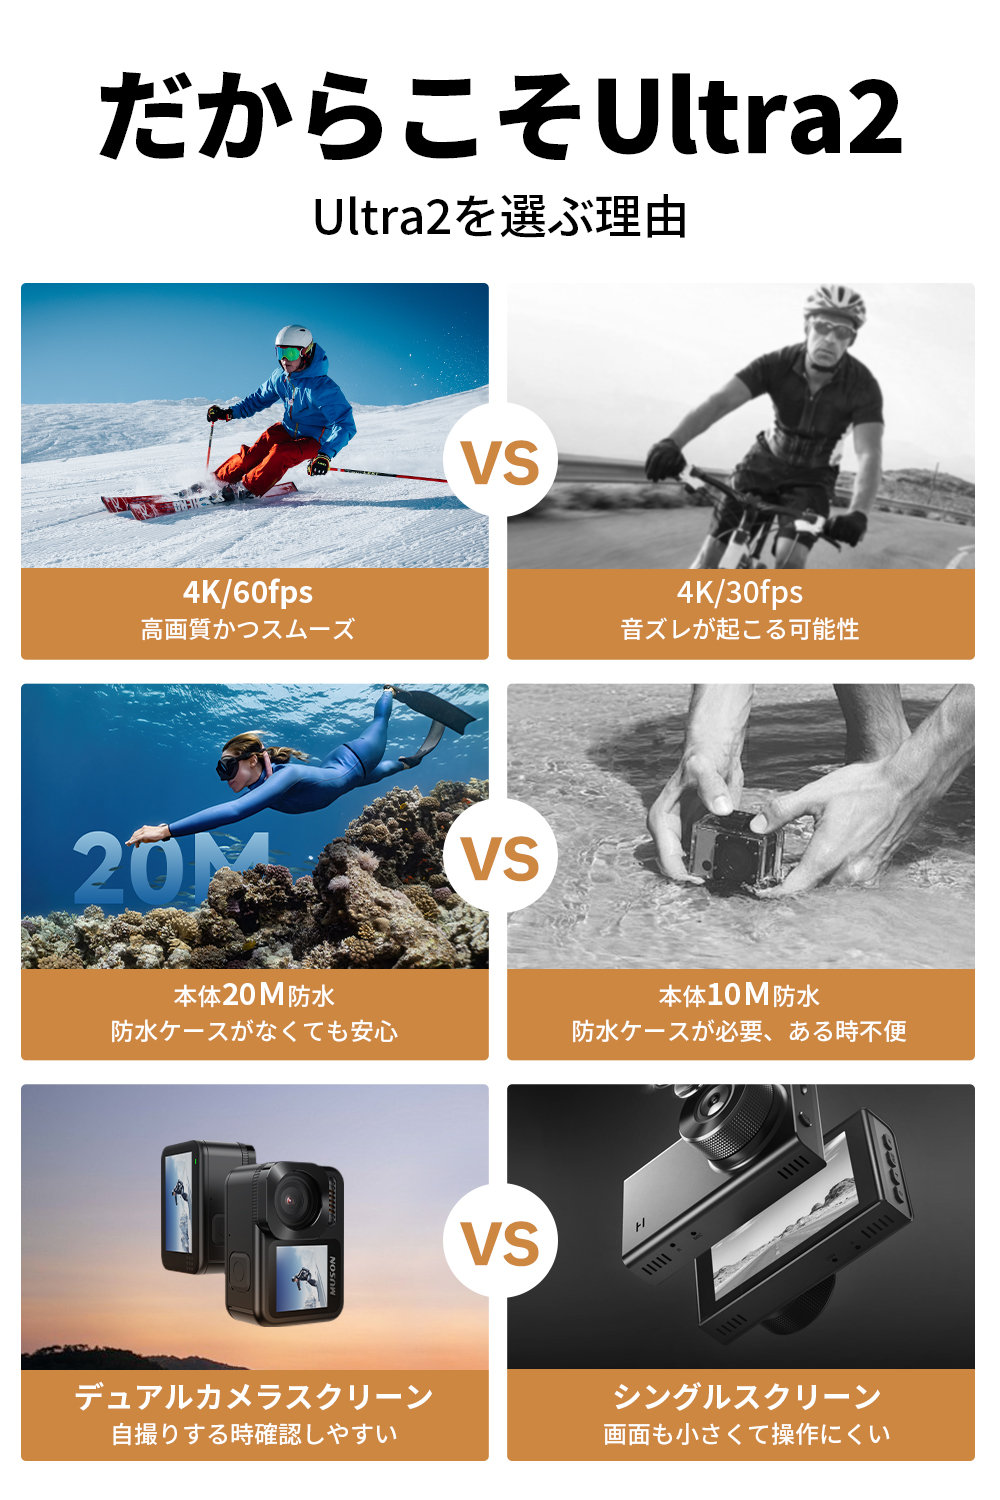  today maximum 25% acquisition Point plus coupon book@ machine waterproof 20M action camera -4Kwifi installing 170 times wide-angle lens remote control attaching Musonultra2 2000 ten thousand pixels underwater camera blurring correction 